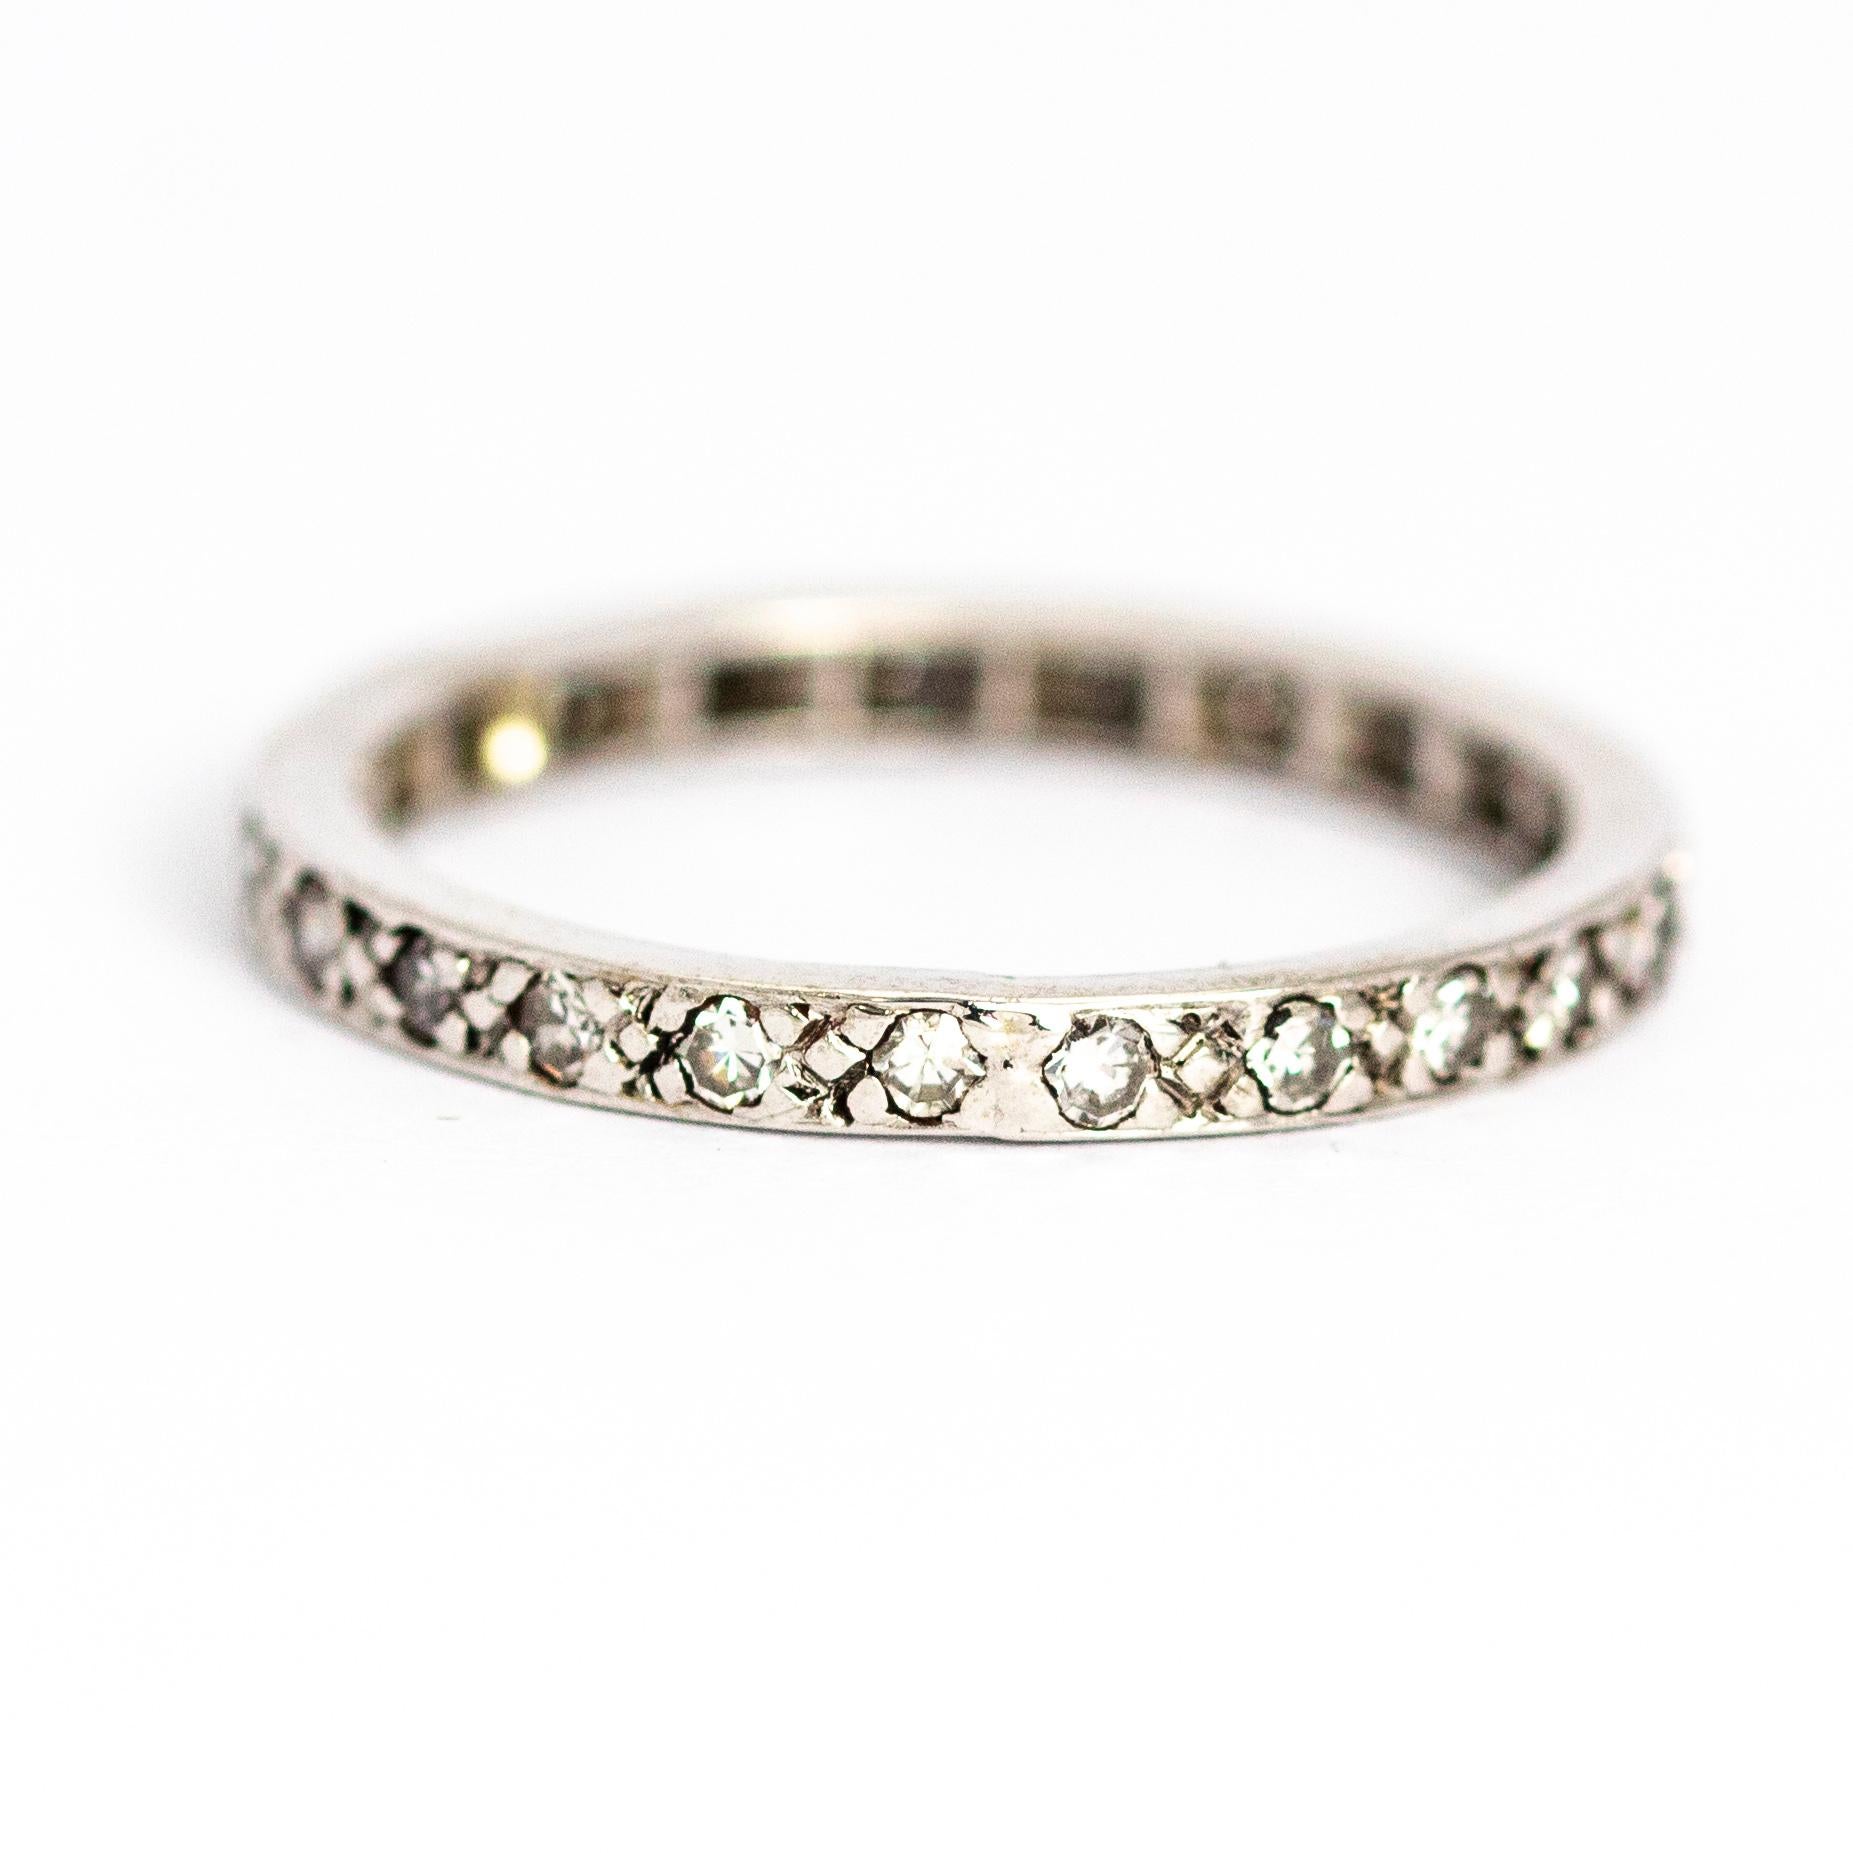 A superb vintage eternity band fully set with 23 wonderful 3 point round-cut white diamonds. Total diamond weight approximately 0.69 carats. Modelled in 18 carat white gold.

Band Width: 2.35mm

Depth to finger: 1.65mm

Ring Size: UK O, US 7